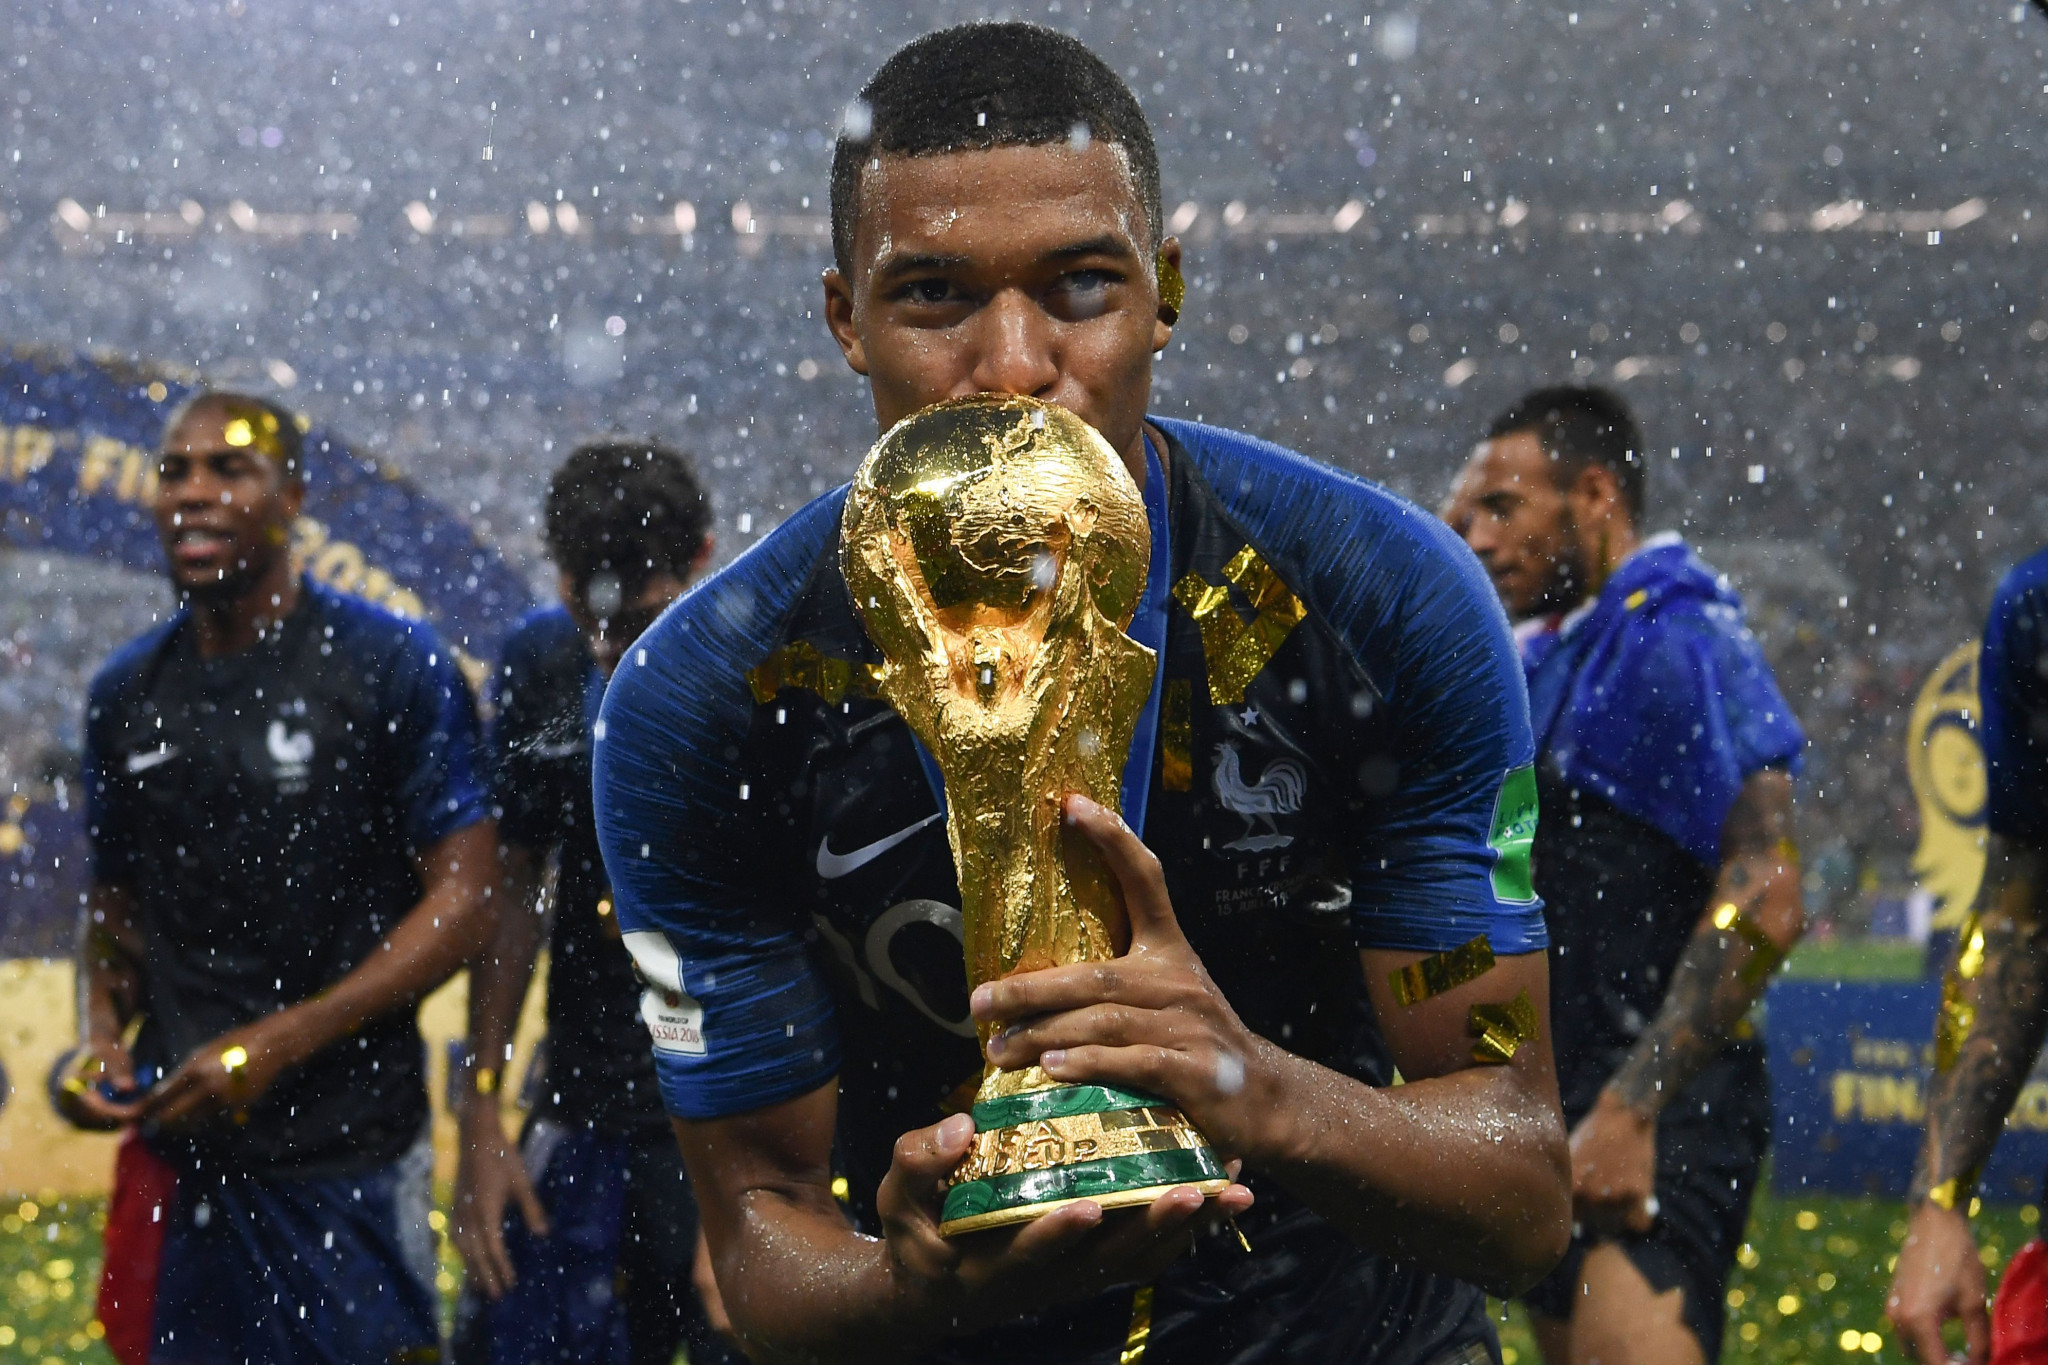 FIFA World Cup winner Kylian Mbappé could be chosen for the Paris 2024 Olympics squad if clubs allow the release of players ©Getty Images